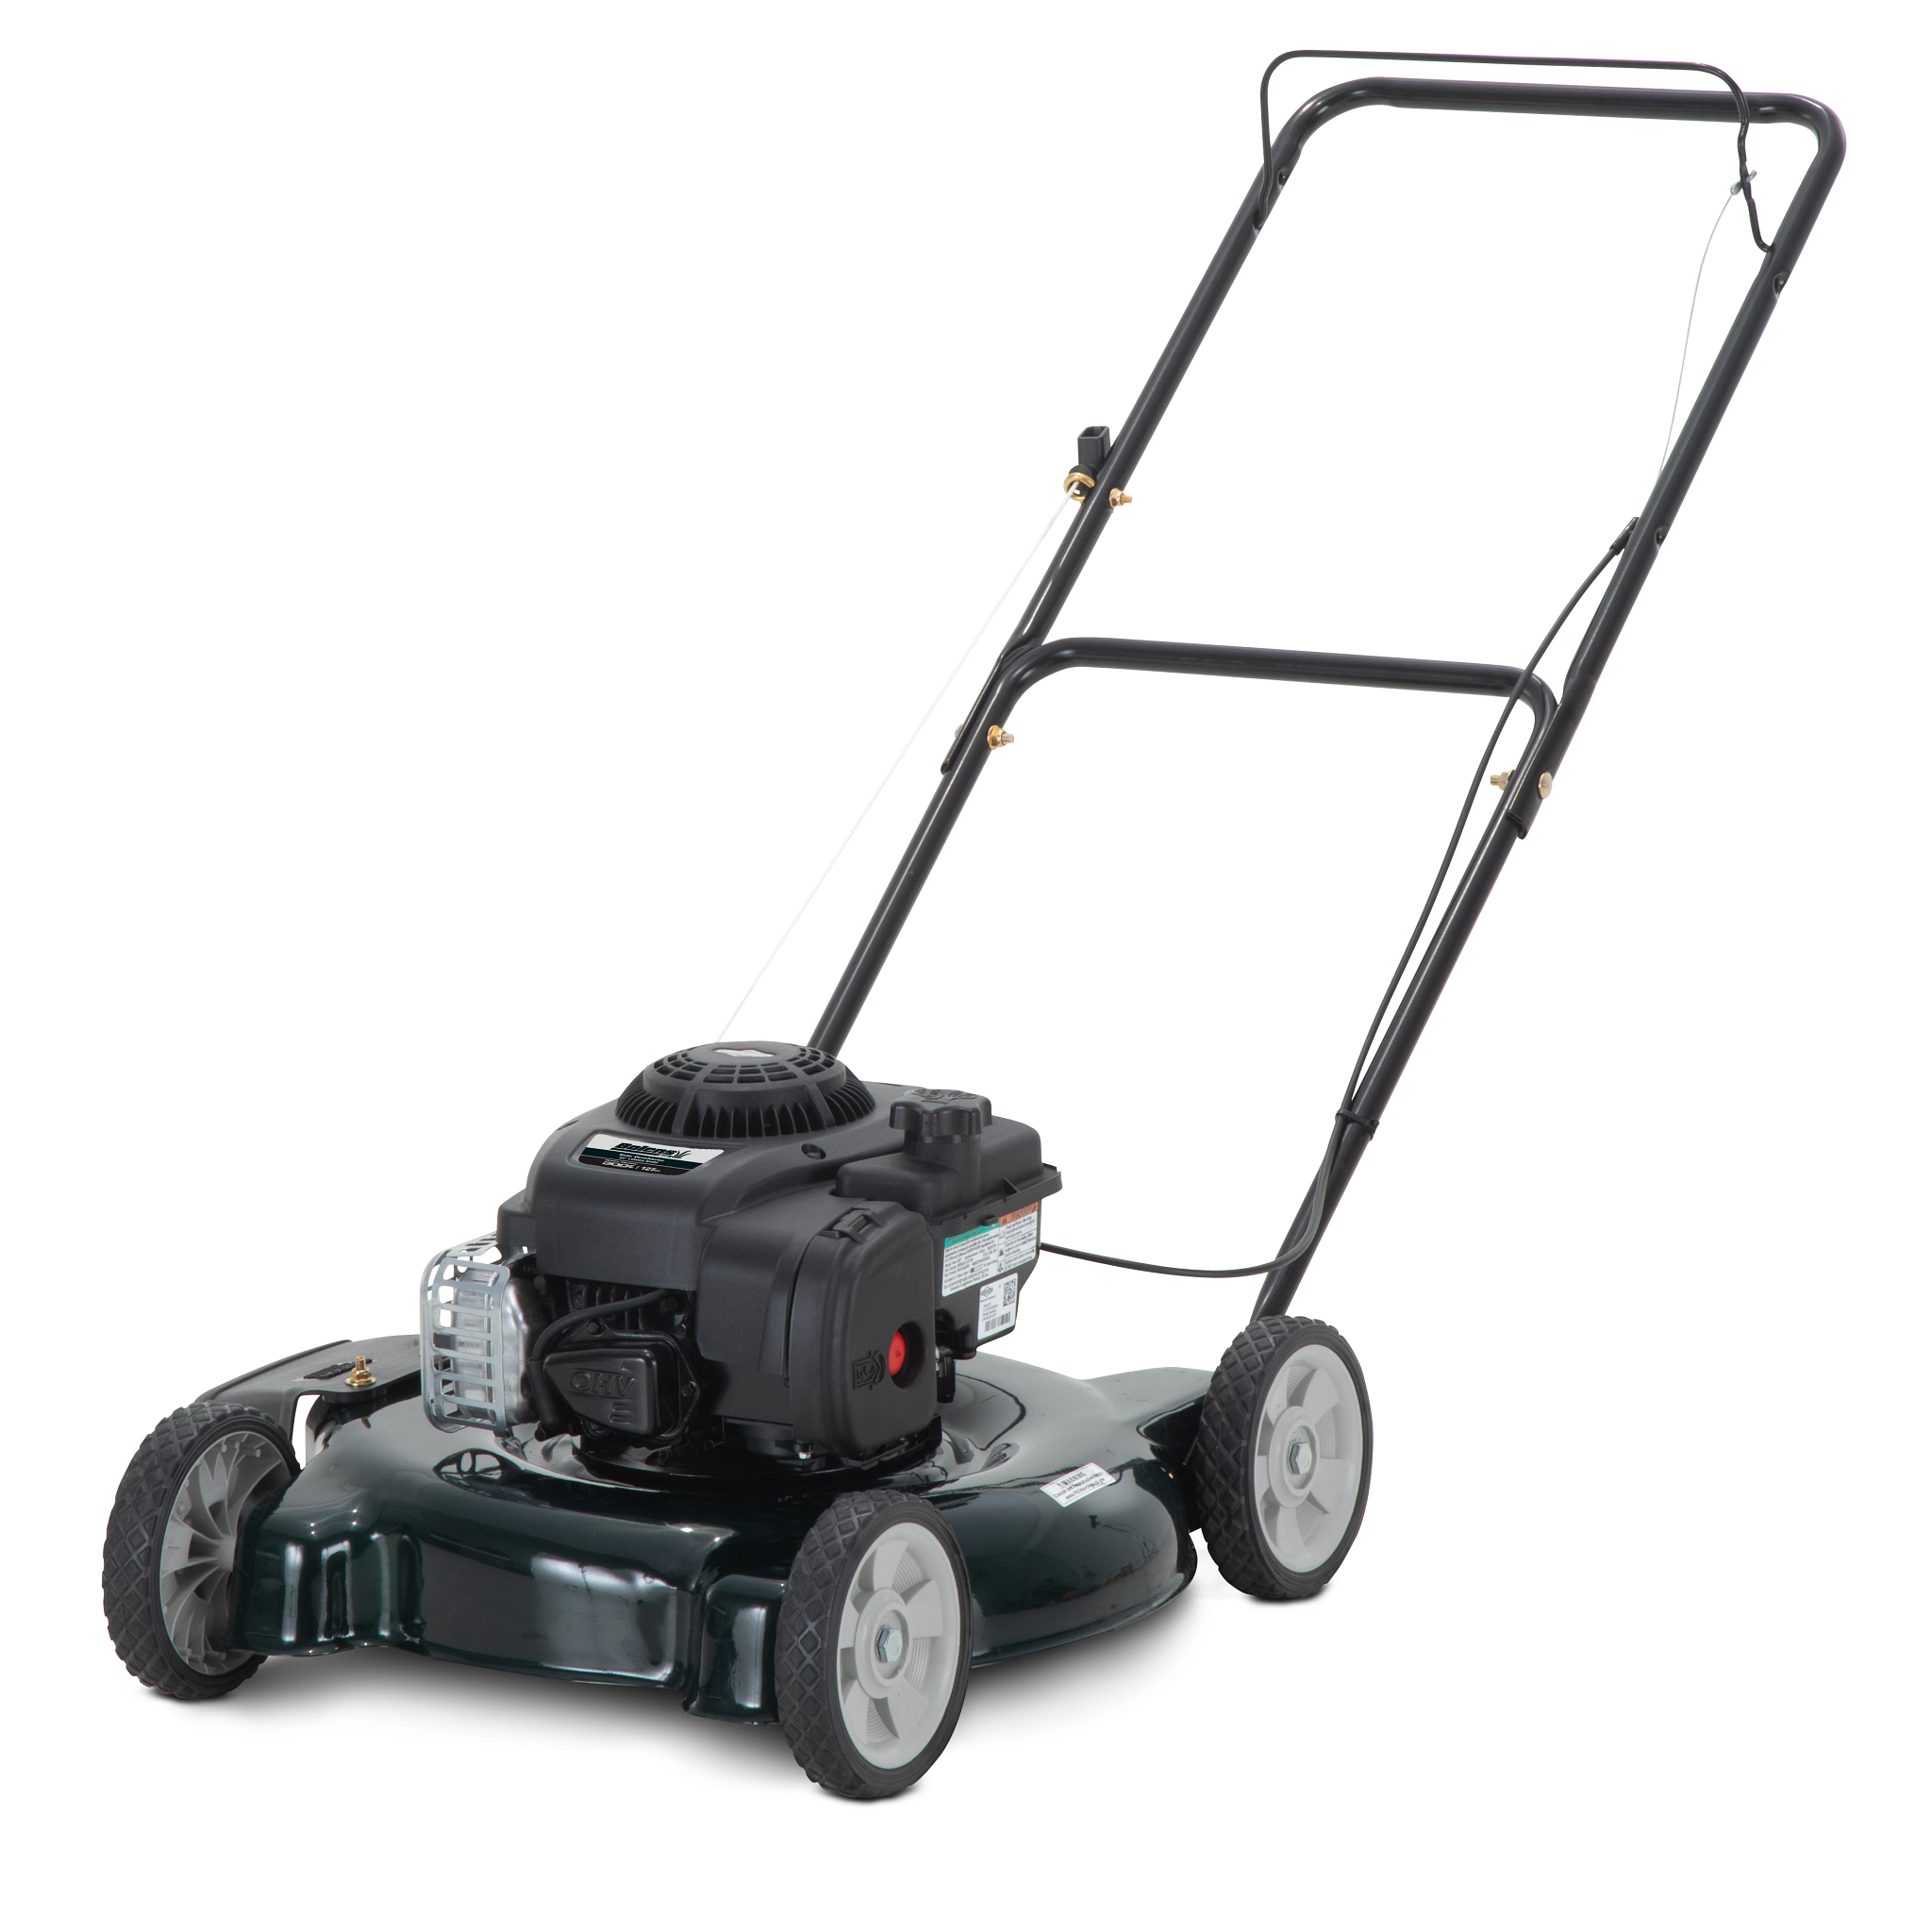 Remington 20" Push Lawn Mower with 125cc Briggs & Stratton Gas Powered Engine - image 1 of 8